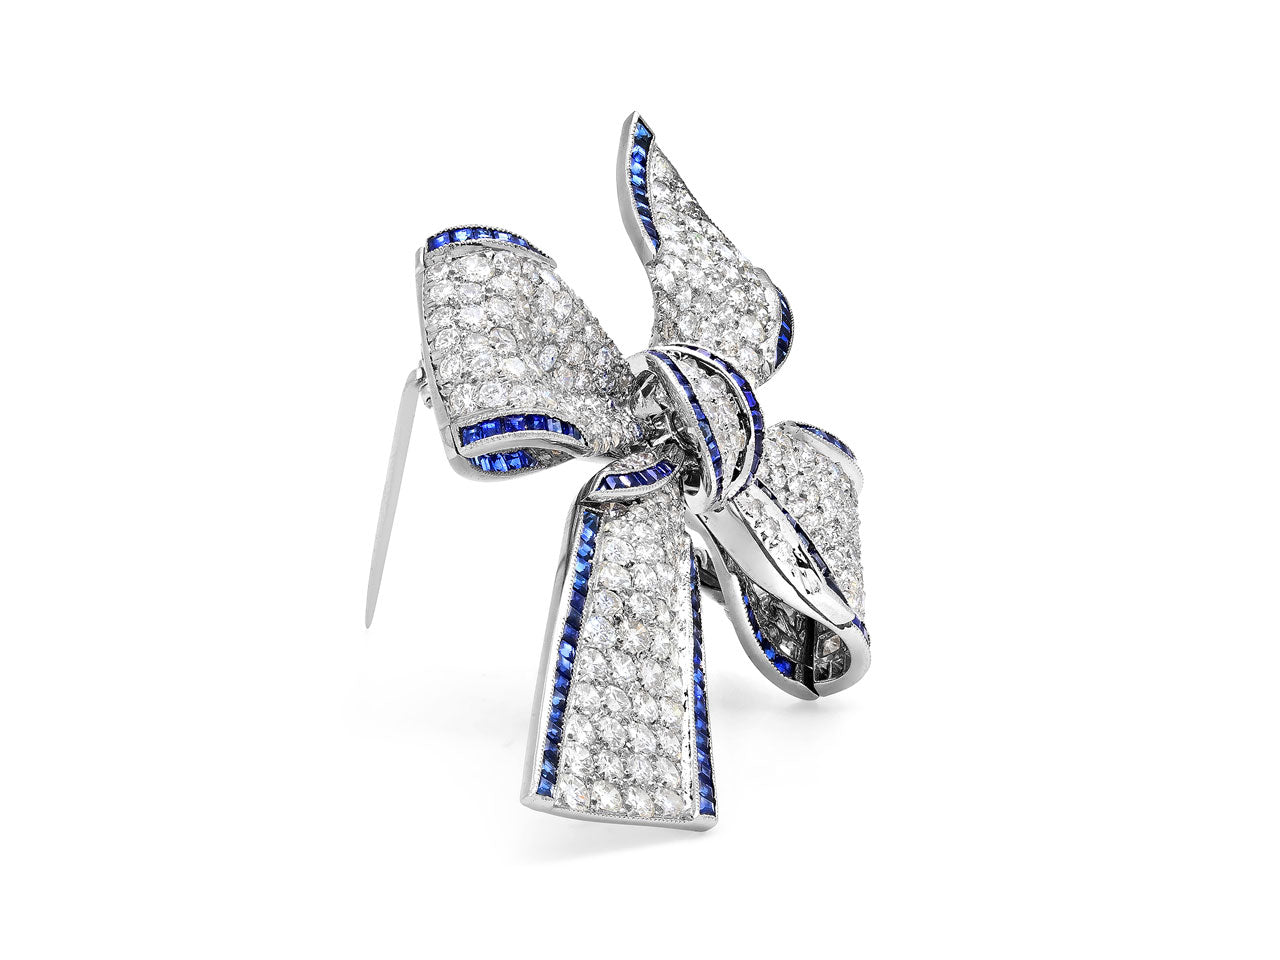 Tiffany & Co. Diamond and Sapphire Bow Brooch in Platinum